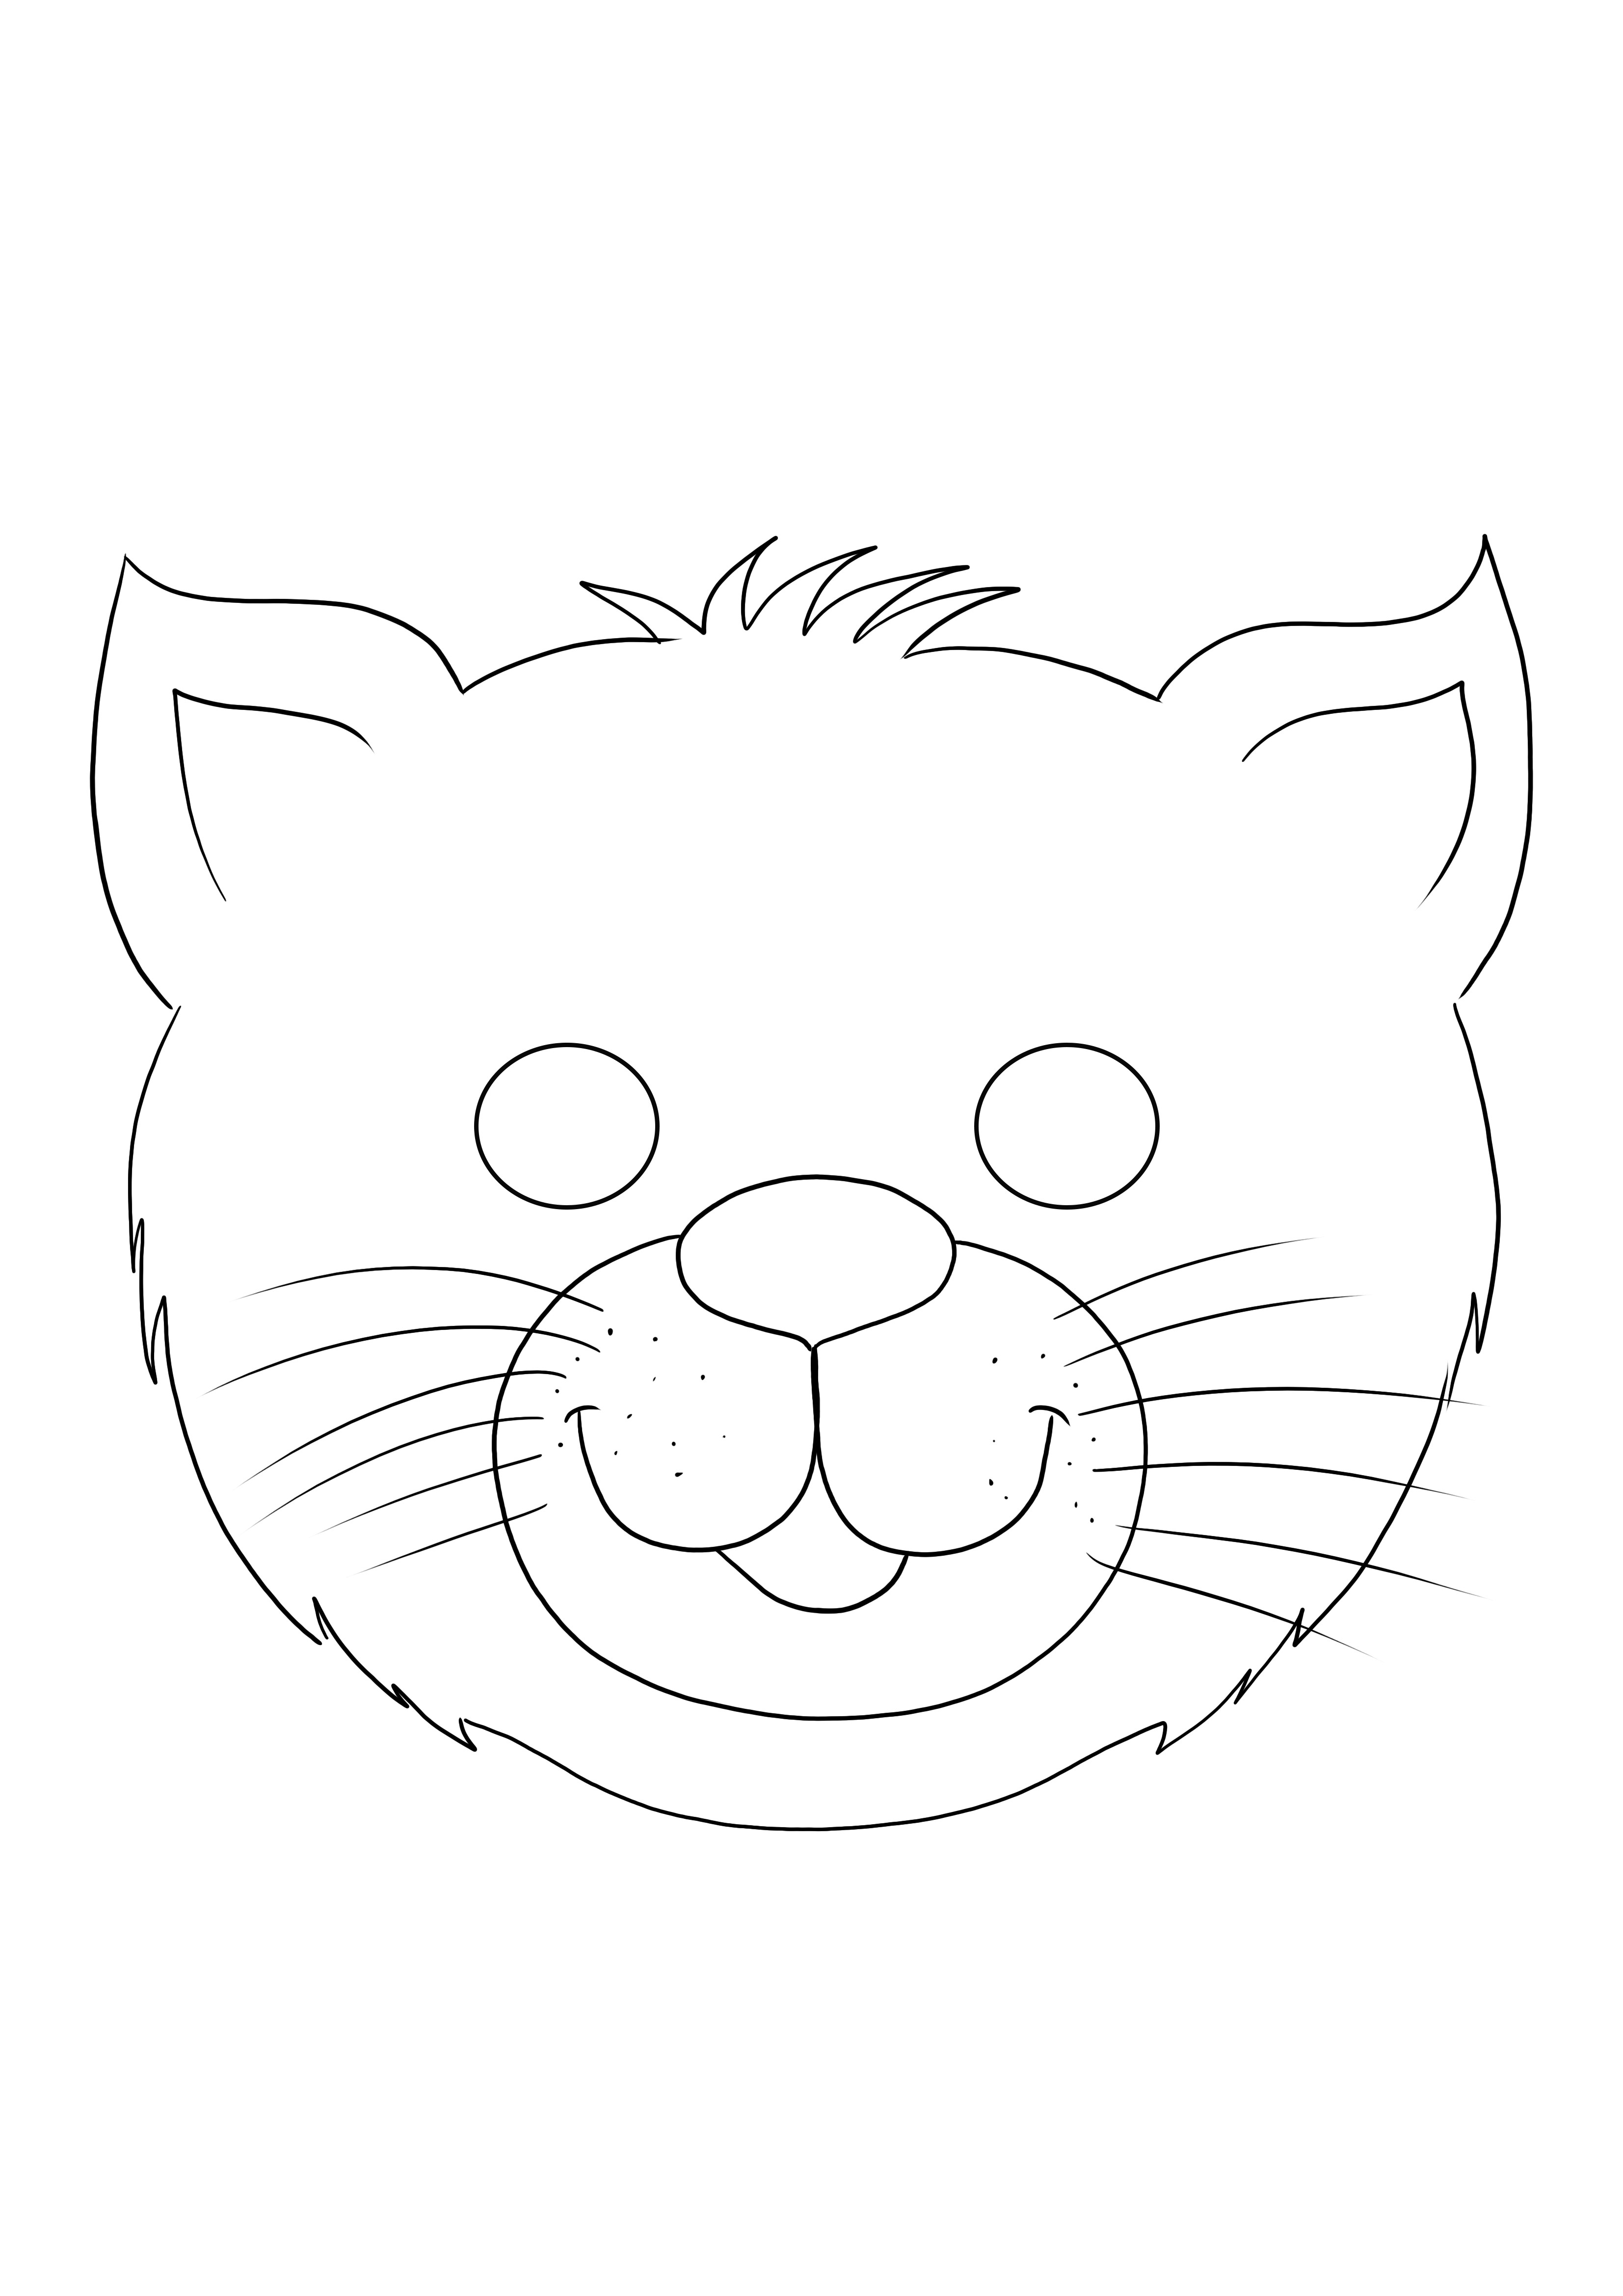 Funny Cat Mask free to print and color page and use for the Holidays season